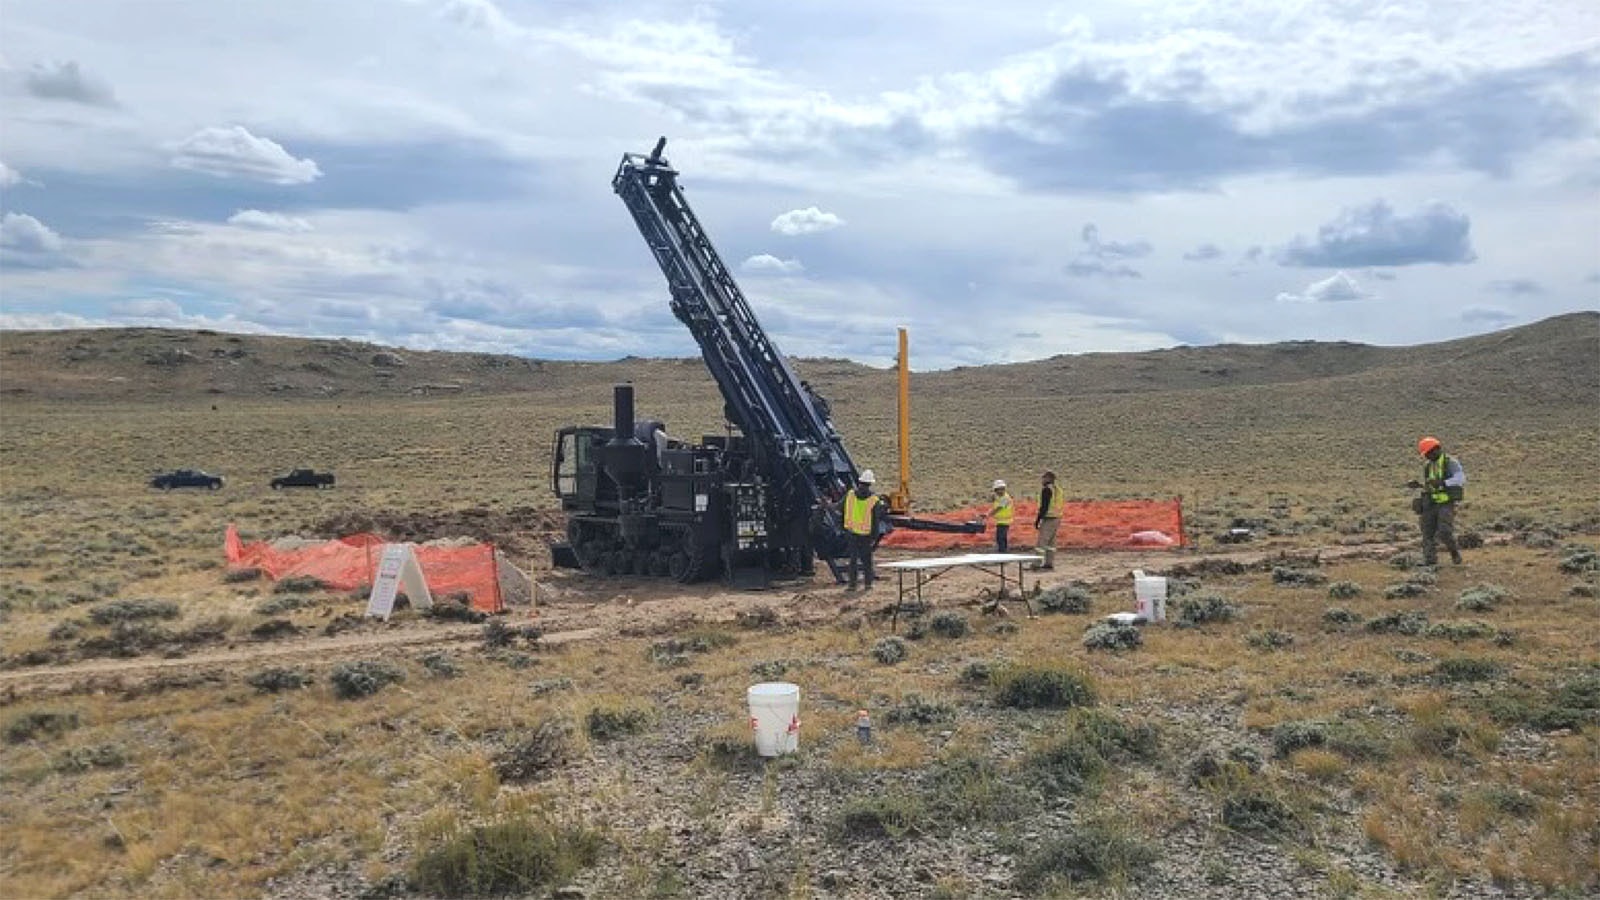 Exploratory work being performed by Visionary Metals Corp. at its King Solomon prospect site, located north of Jeffrey City, Wyoming.